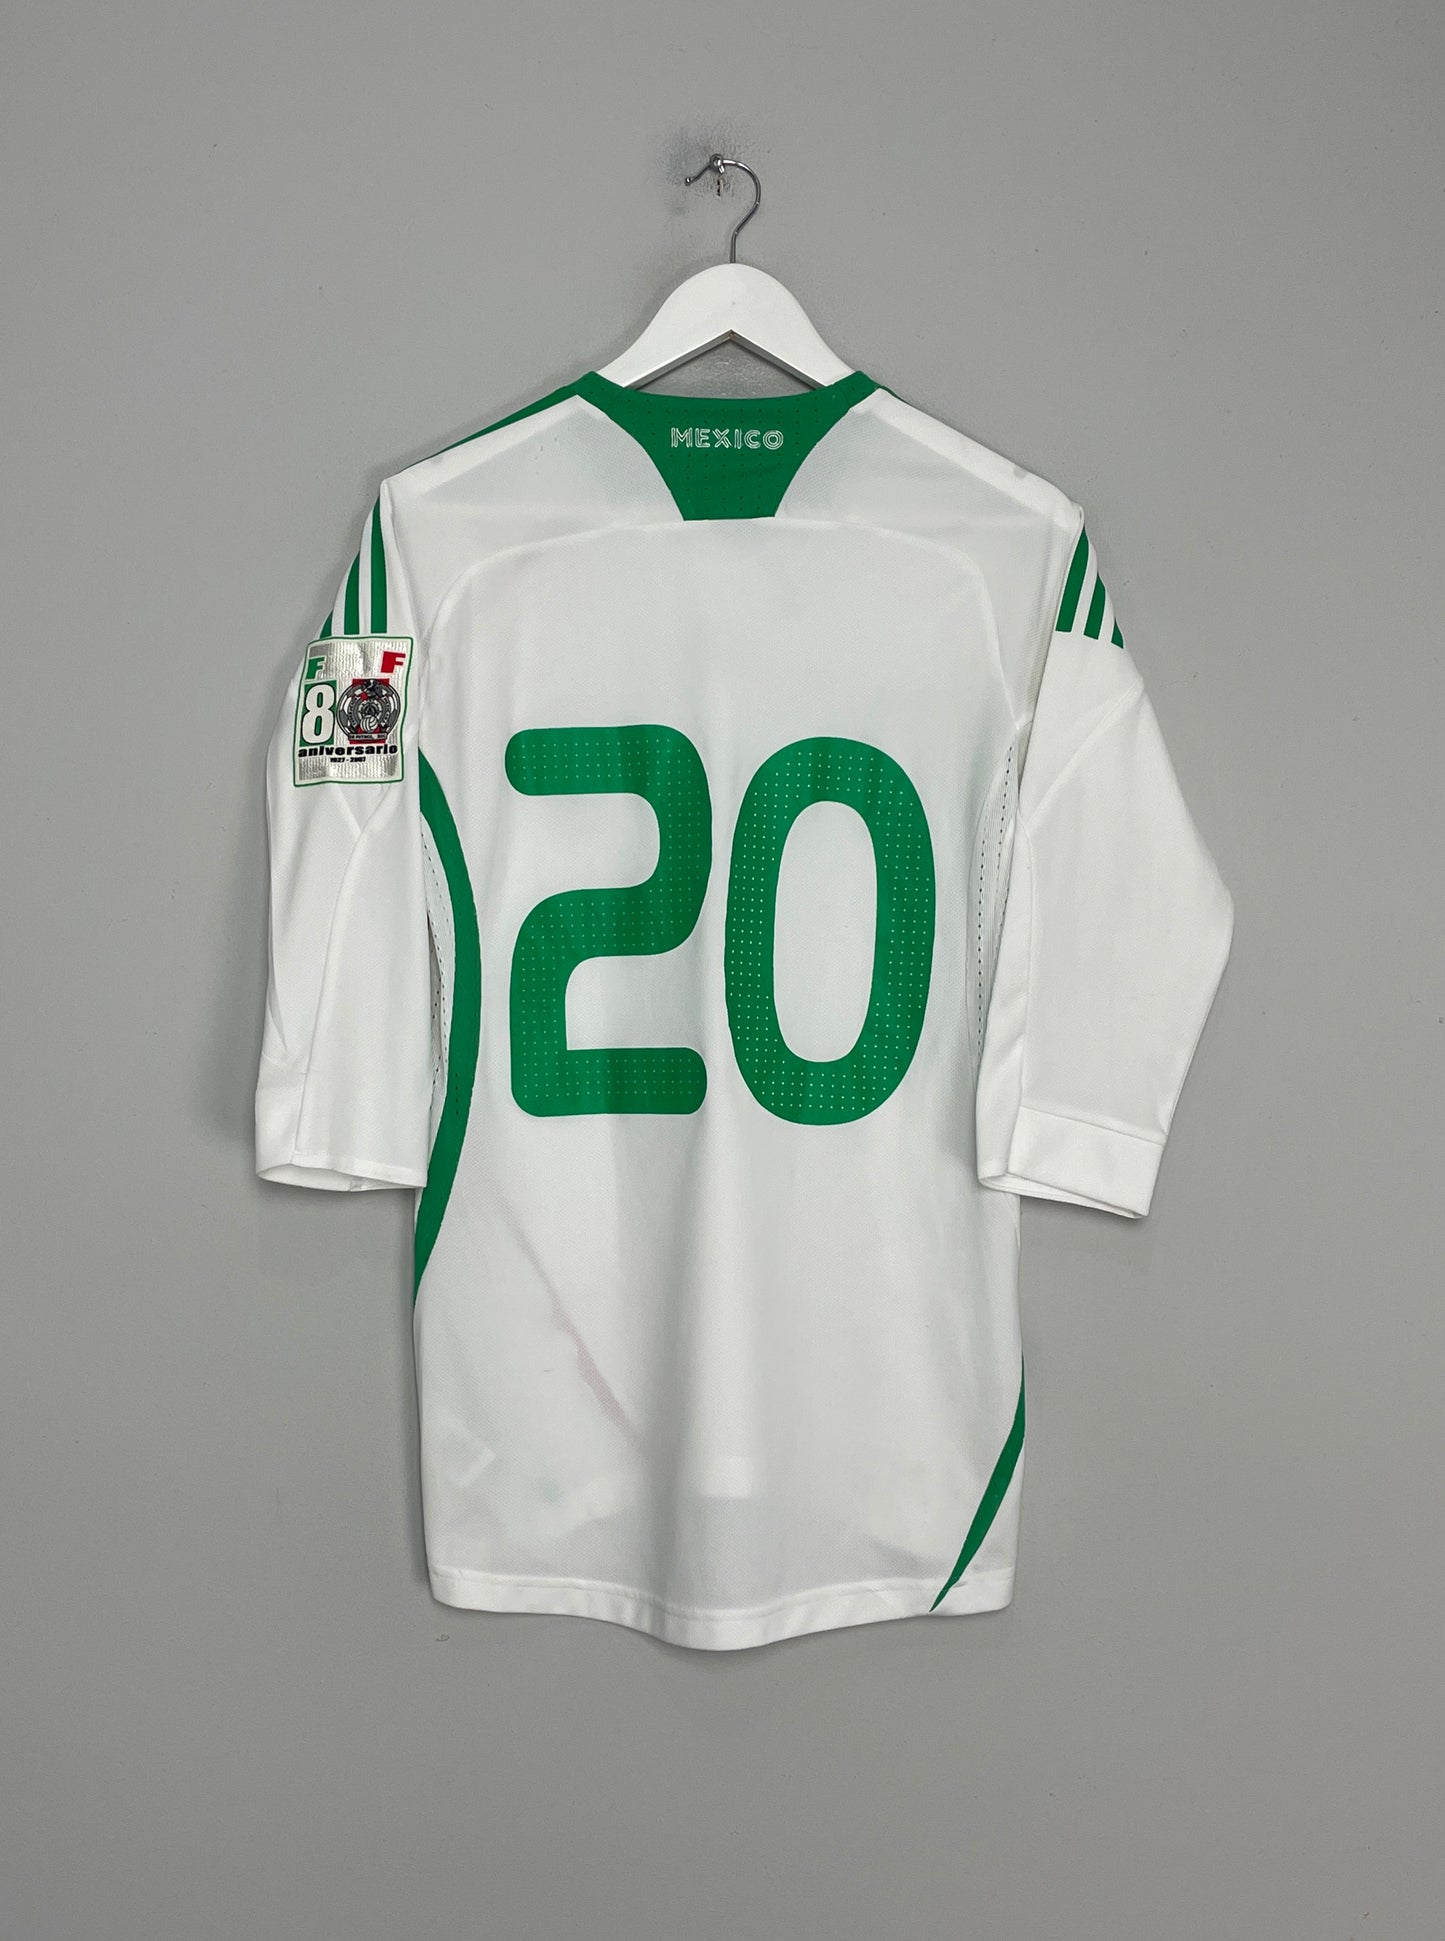 2008/09 MEXICO #20 *PLAYER ISSUE* AWAY SHIRT (M) ADIDAS